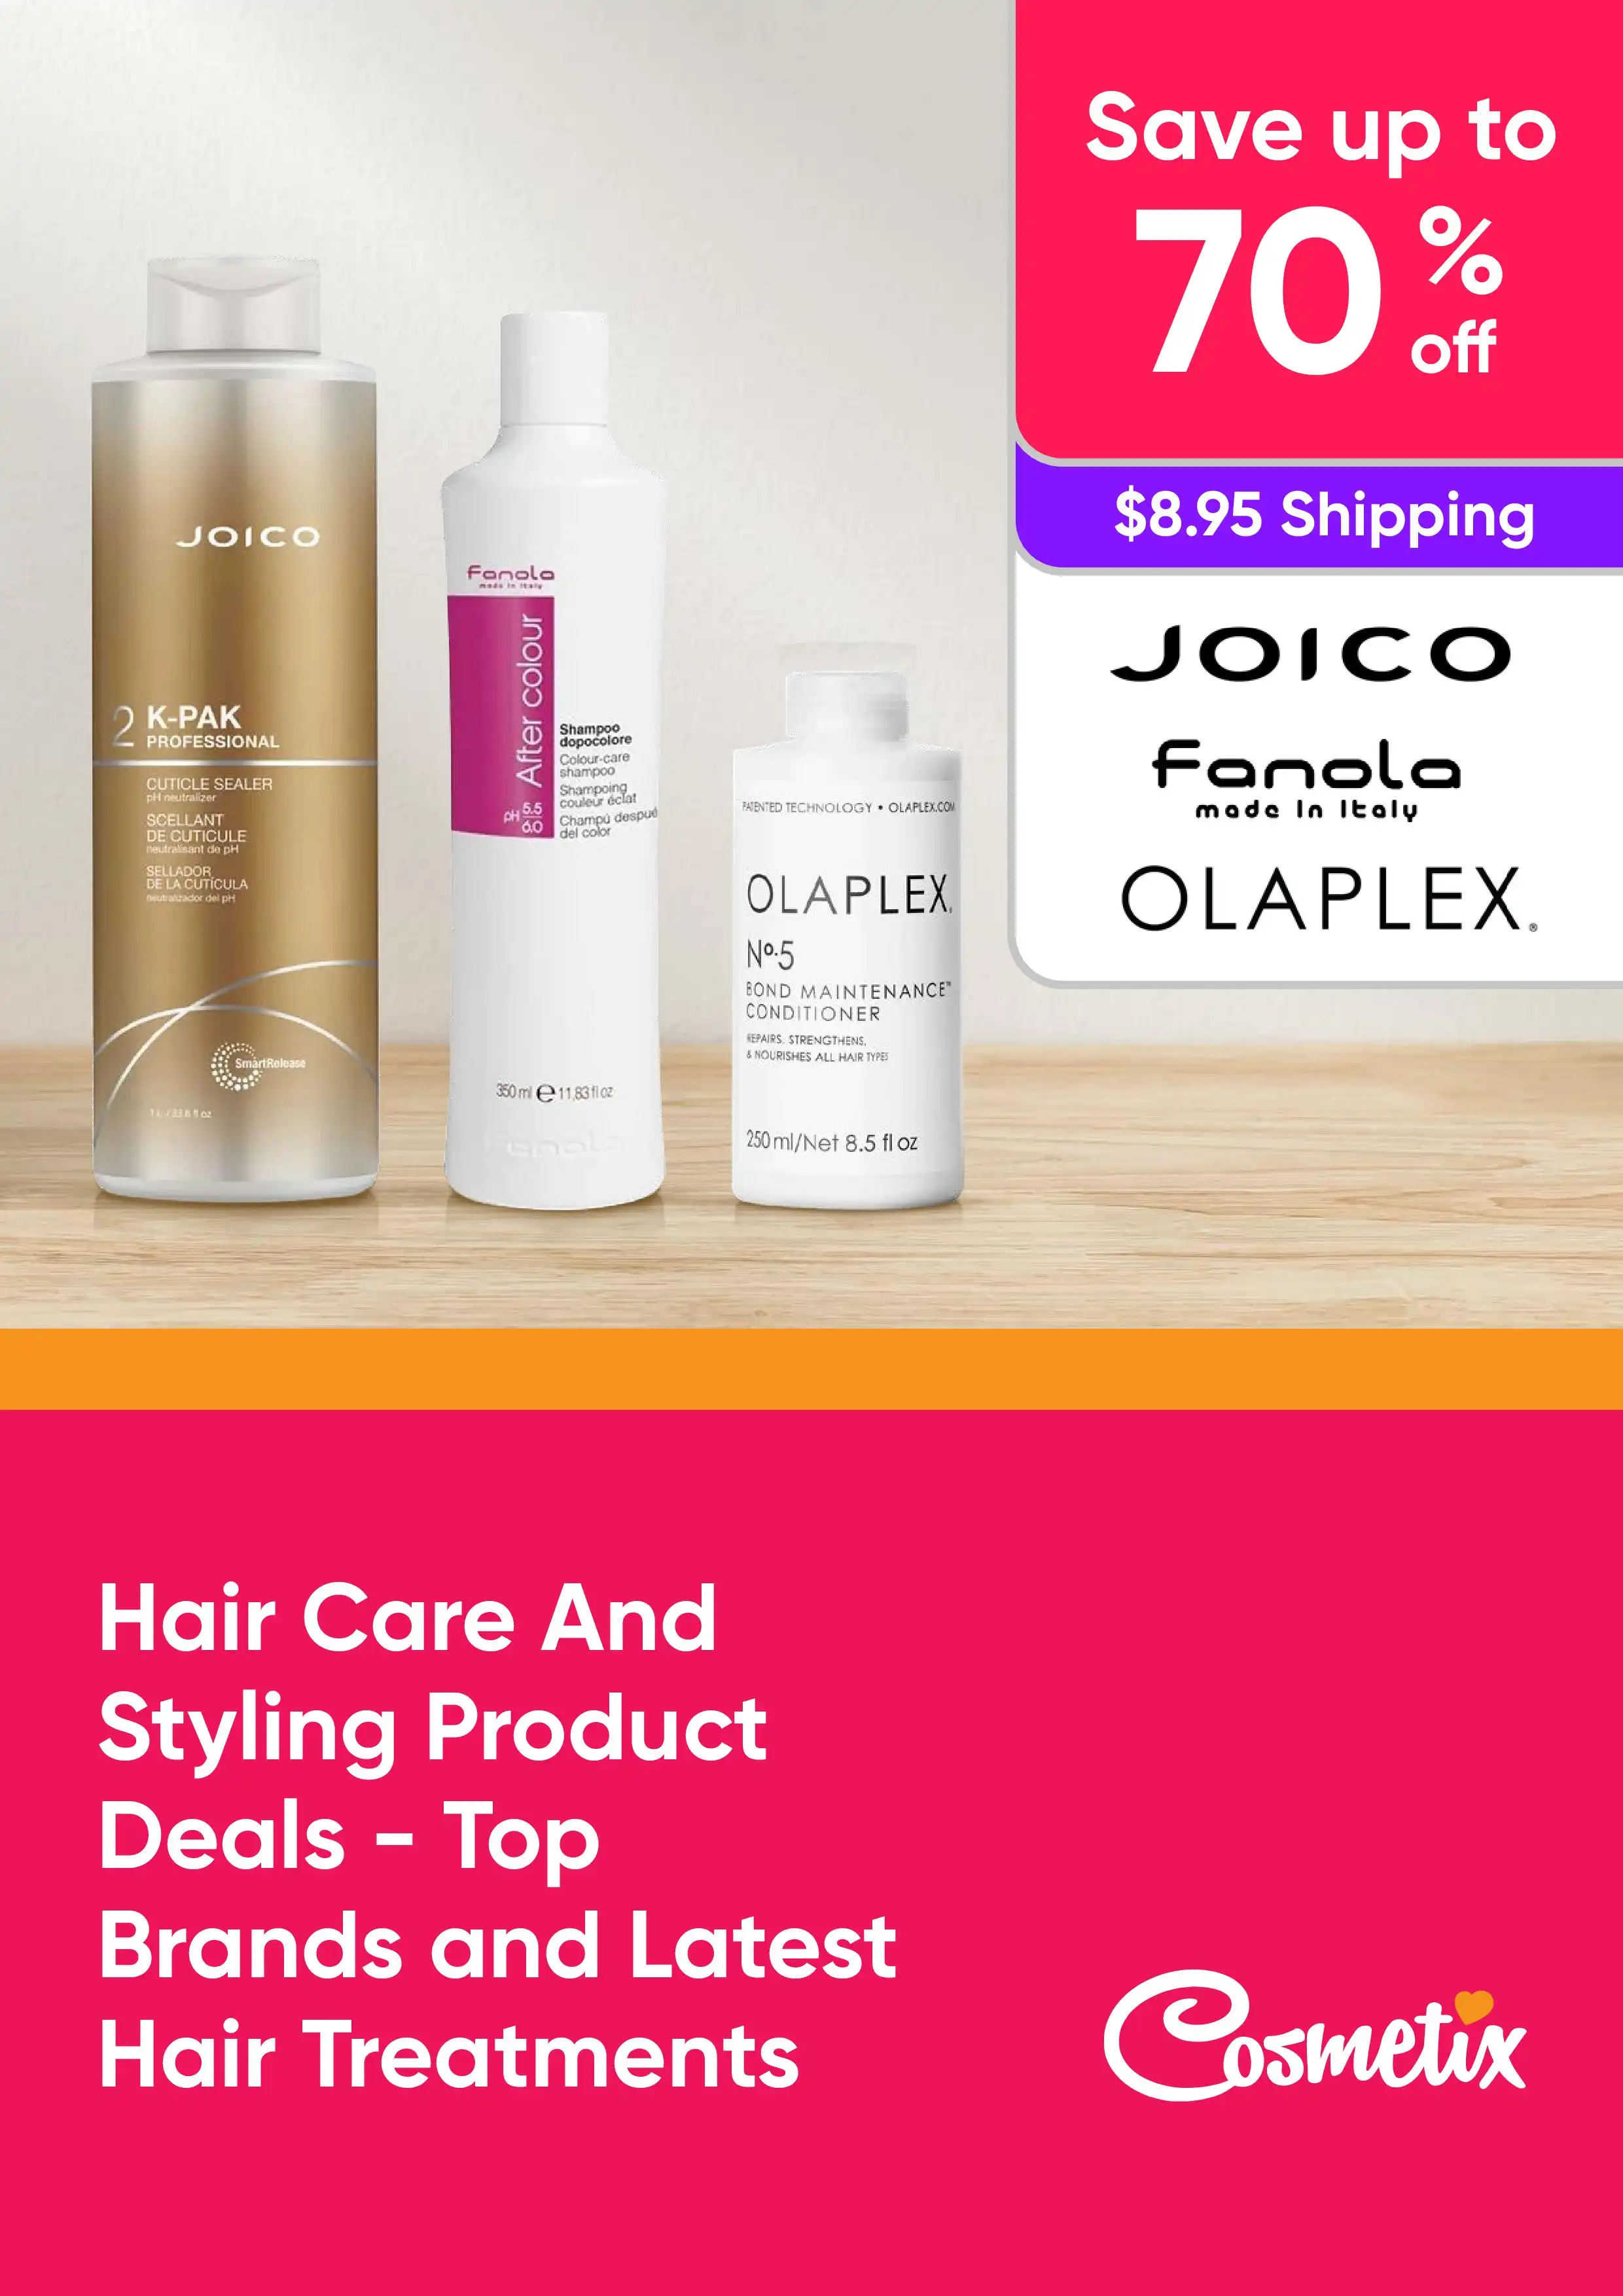 Hair Care And Styling Product Deals - Save Up to 70% Off Top Brands and Latest Hair Treatments